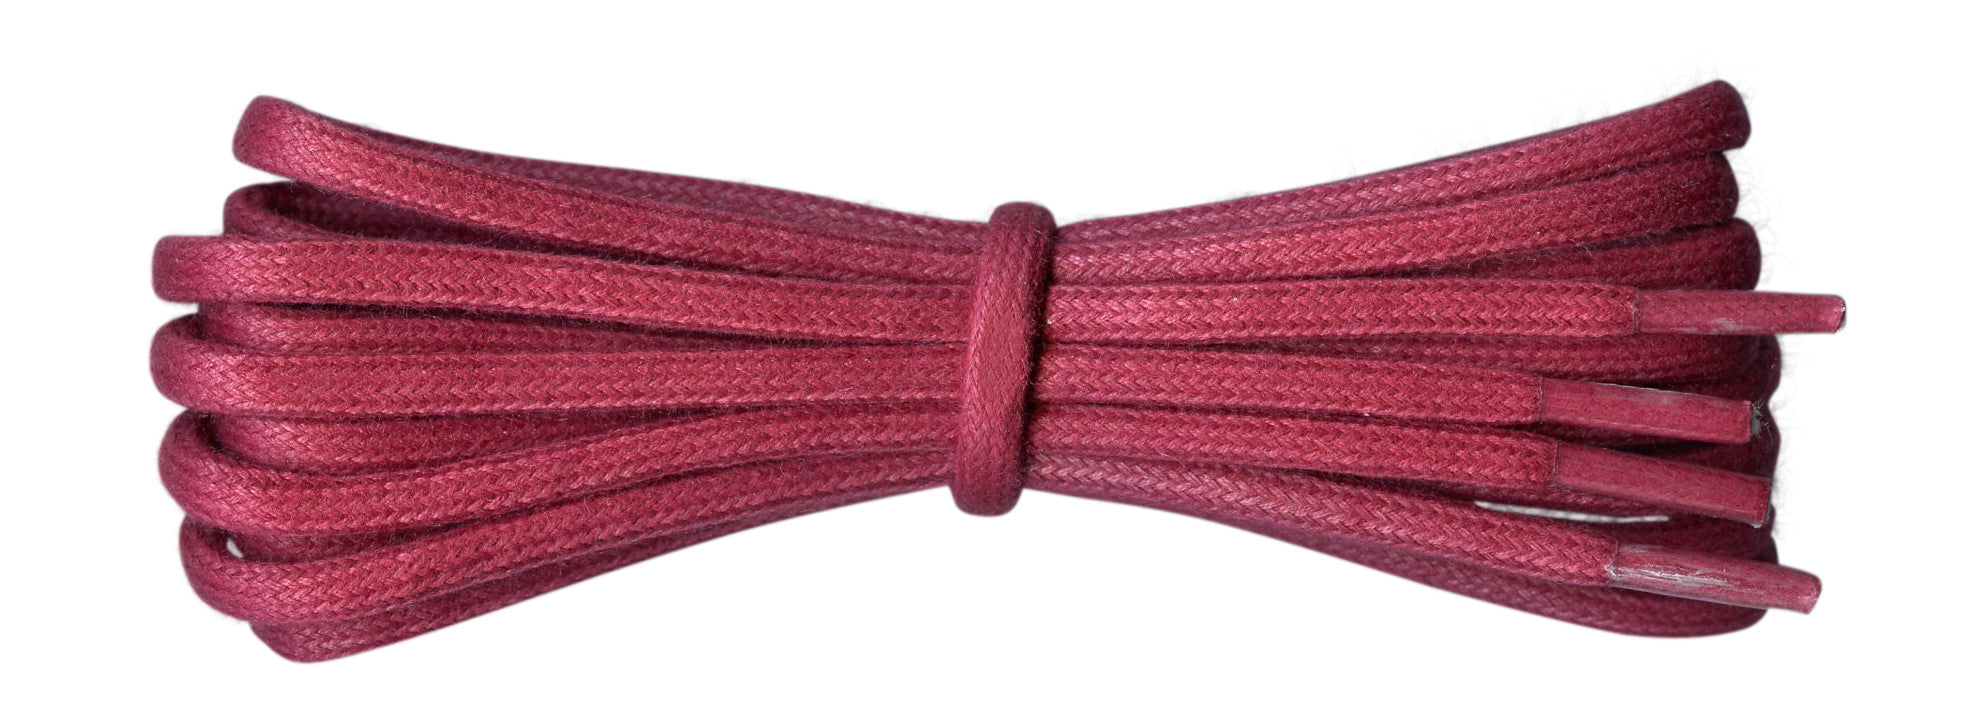 burgundy boot laces